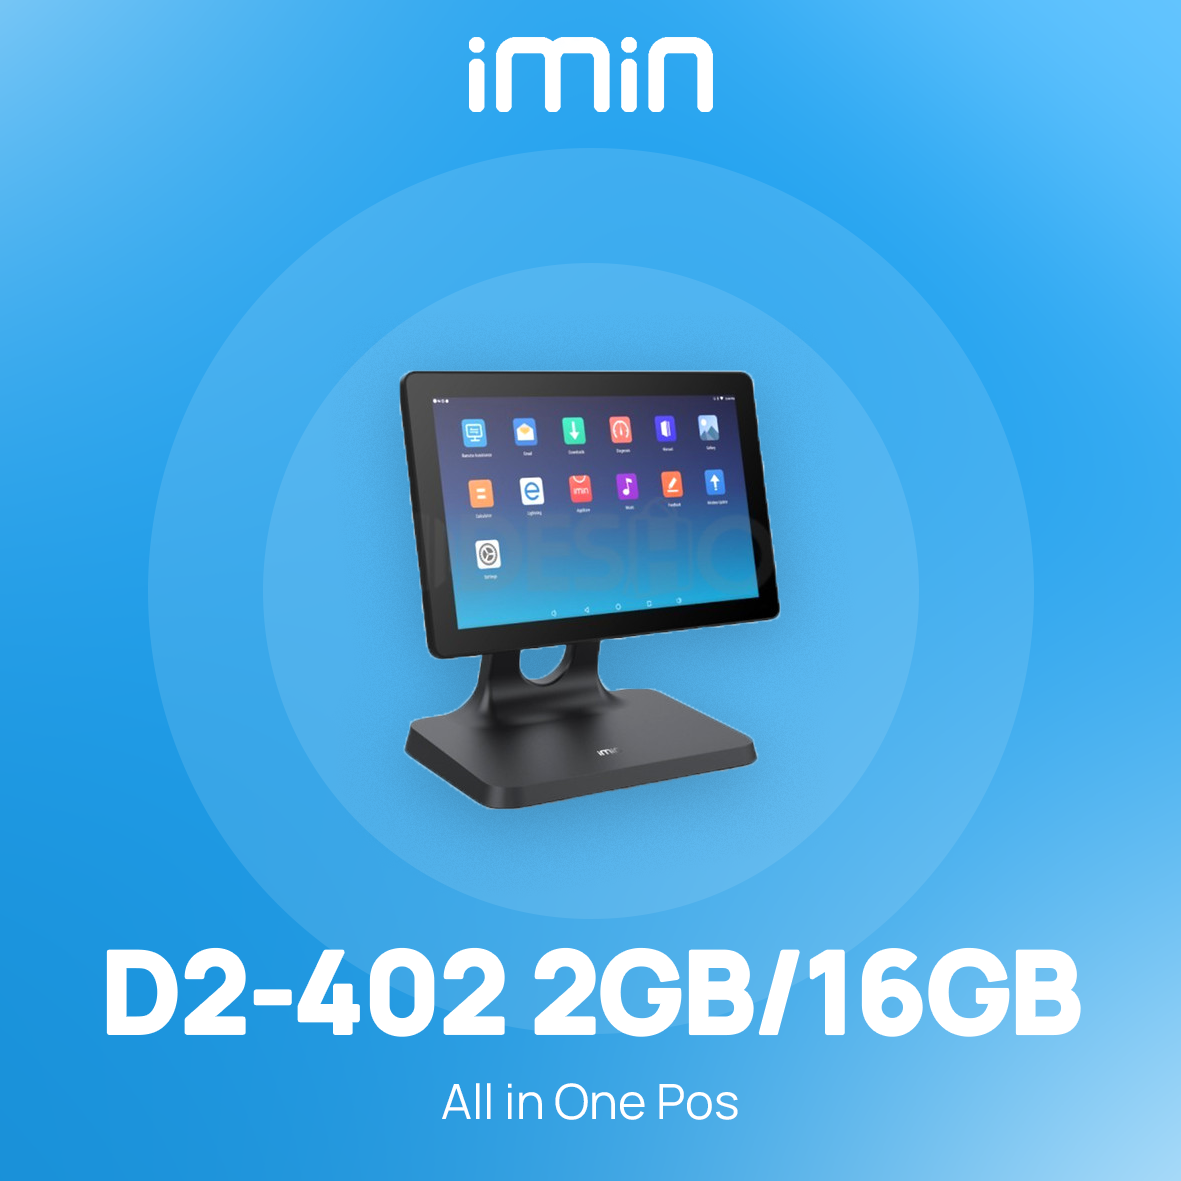 All In One Pos Imin D2-402 2GB/16GB